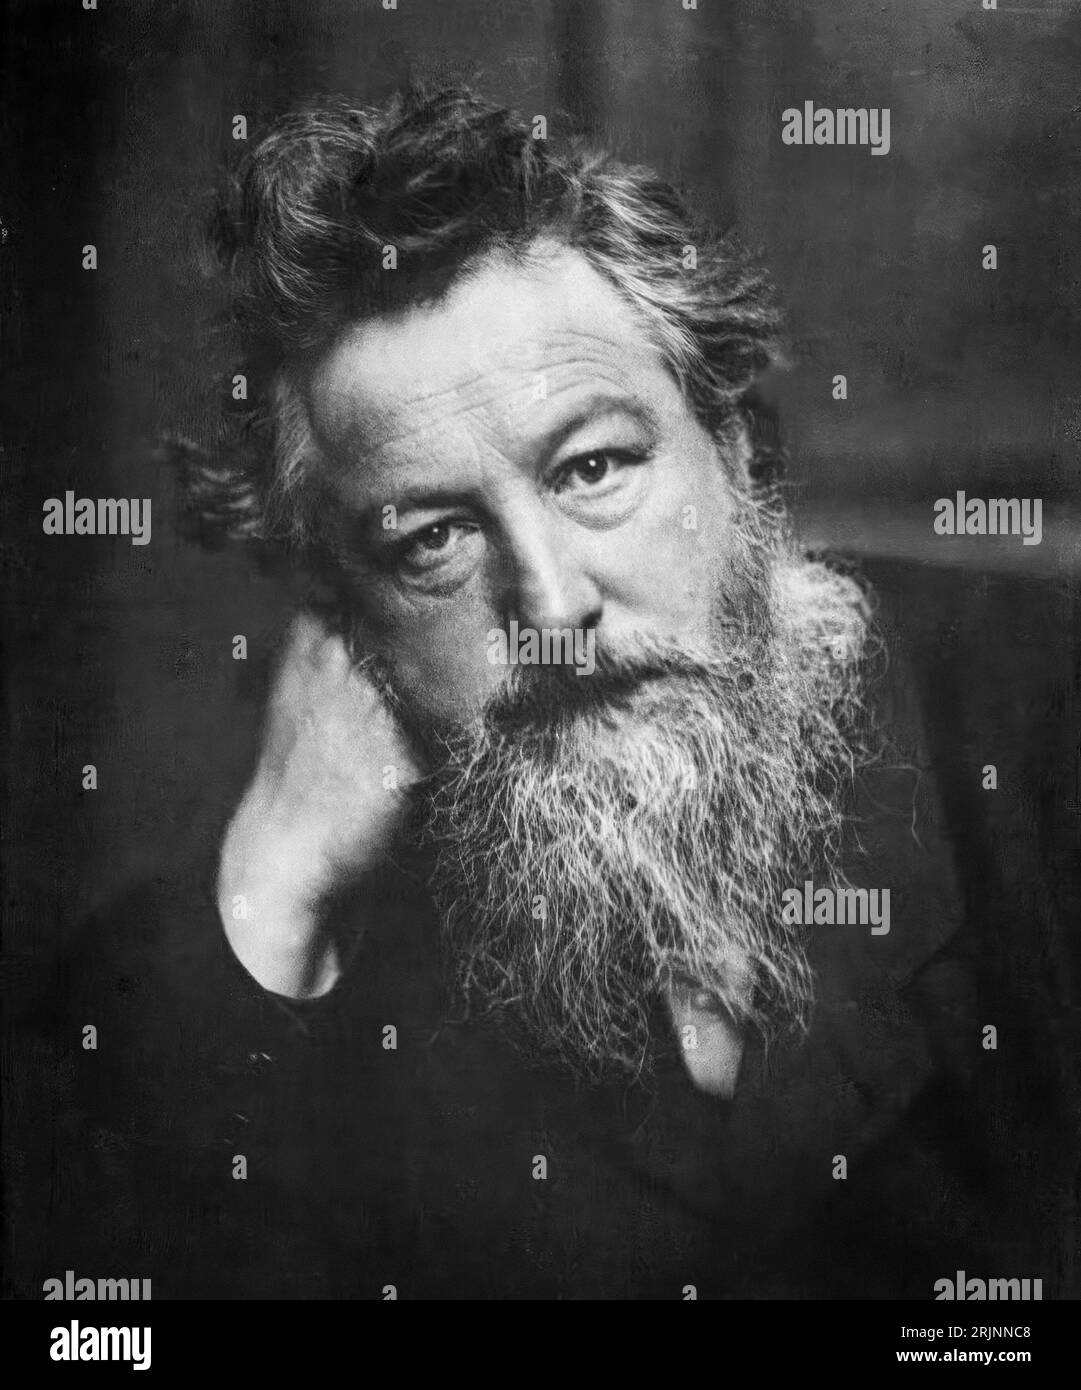 William Morris (1834-1896), portrait photograph aged 53 by Frederick Hollyer, 1887-1888 Stock Photo